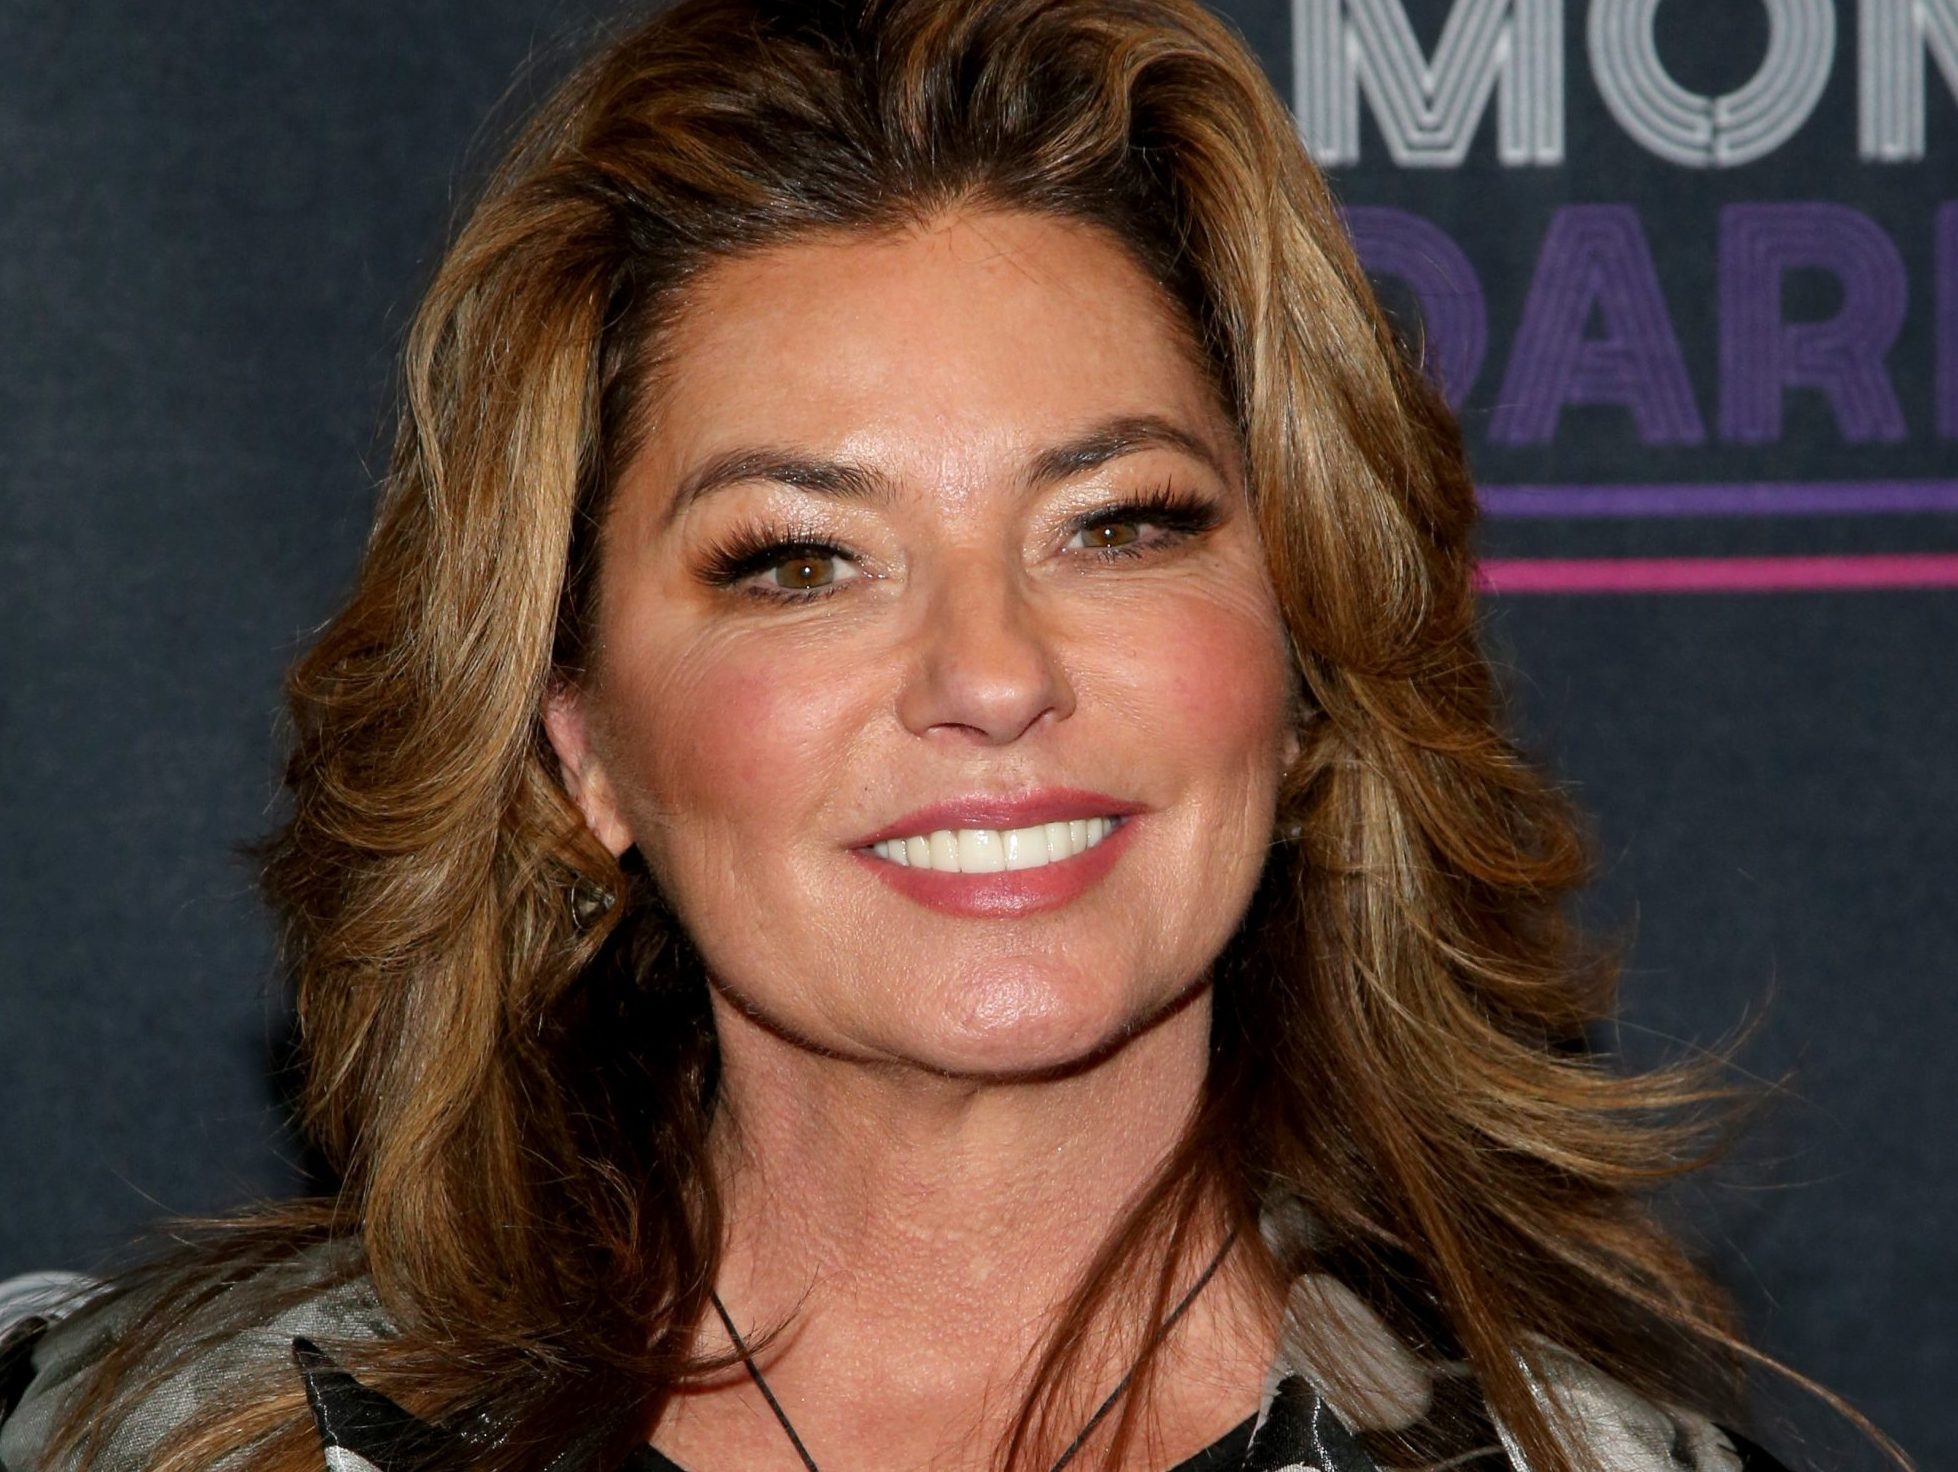 Shania Twain doesn’t know how long her voice will last following